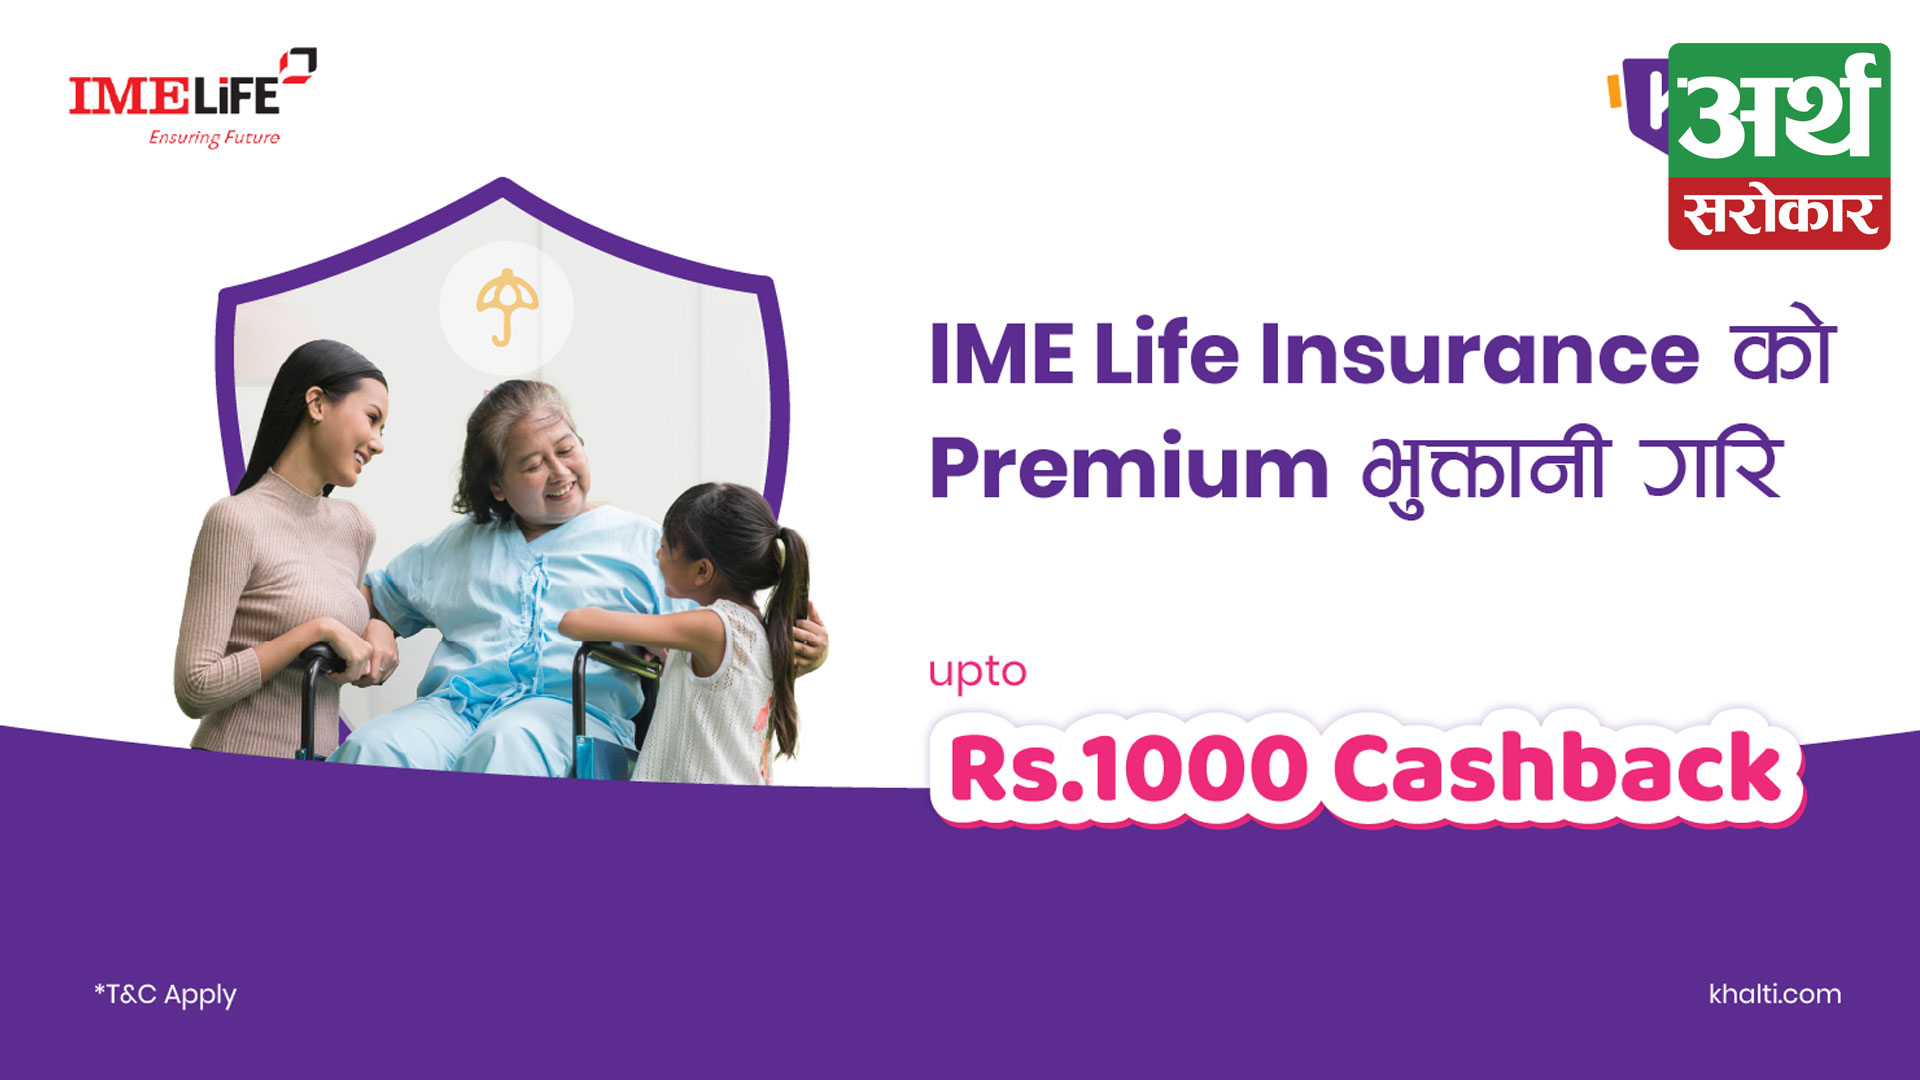 Get up to Rs. 1,000 cashback on IME Life Insurance Payment through Khalti